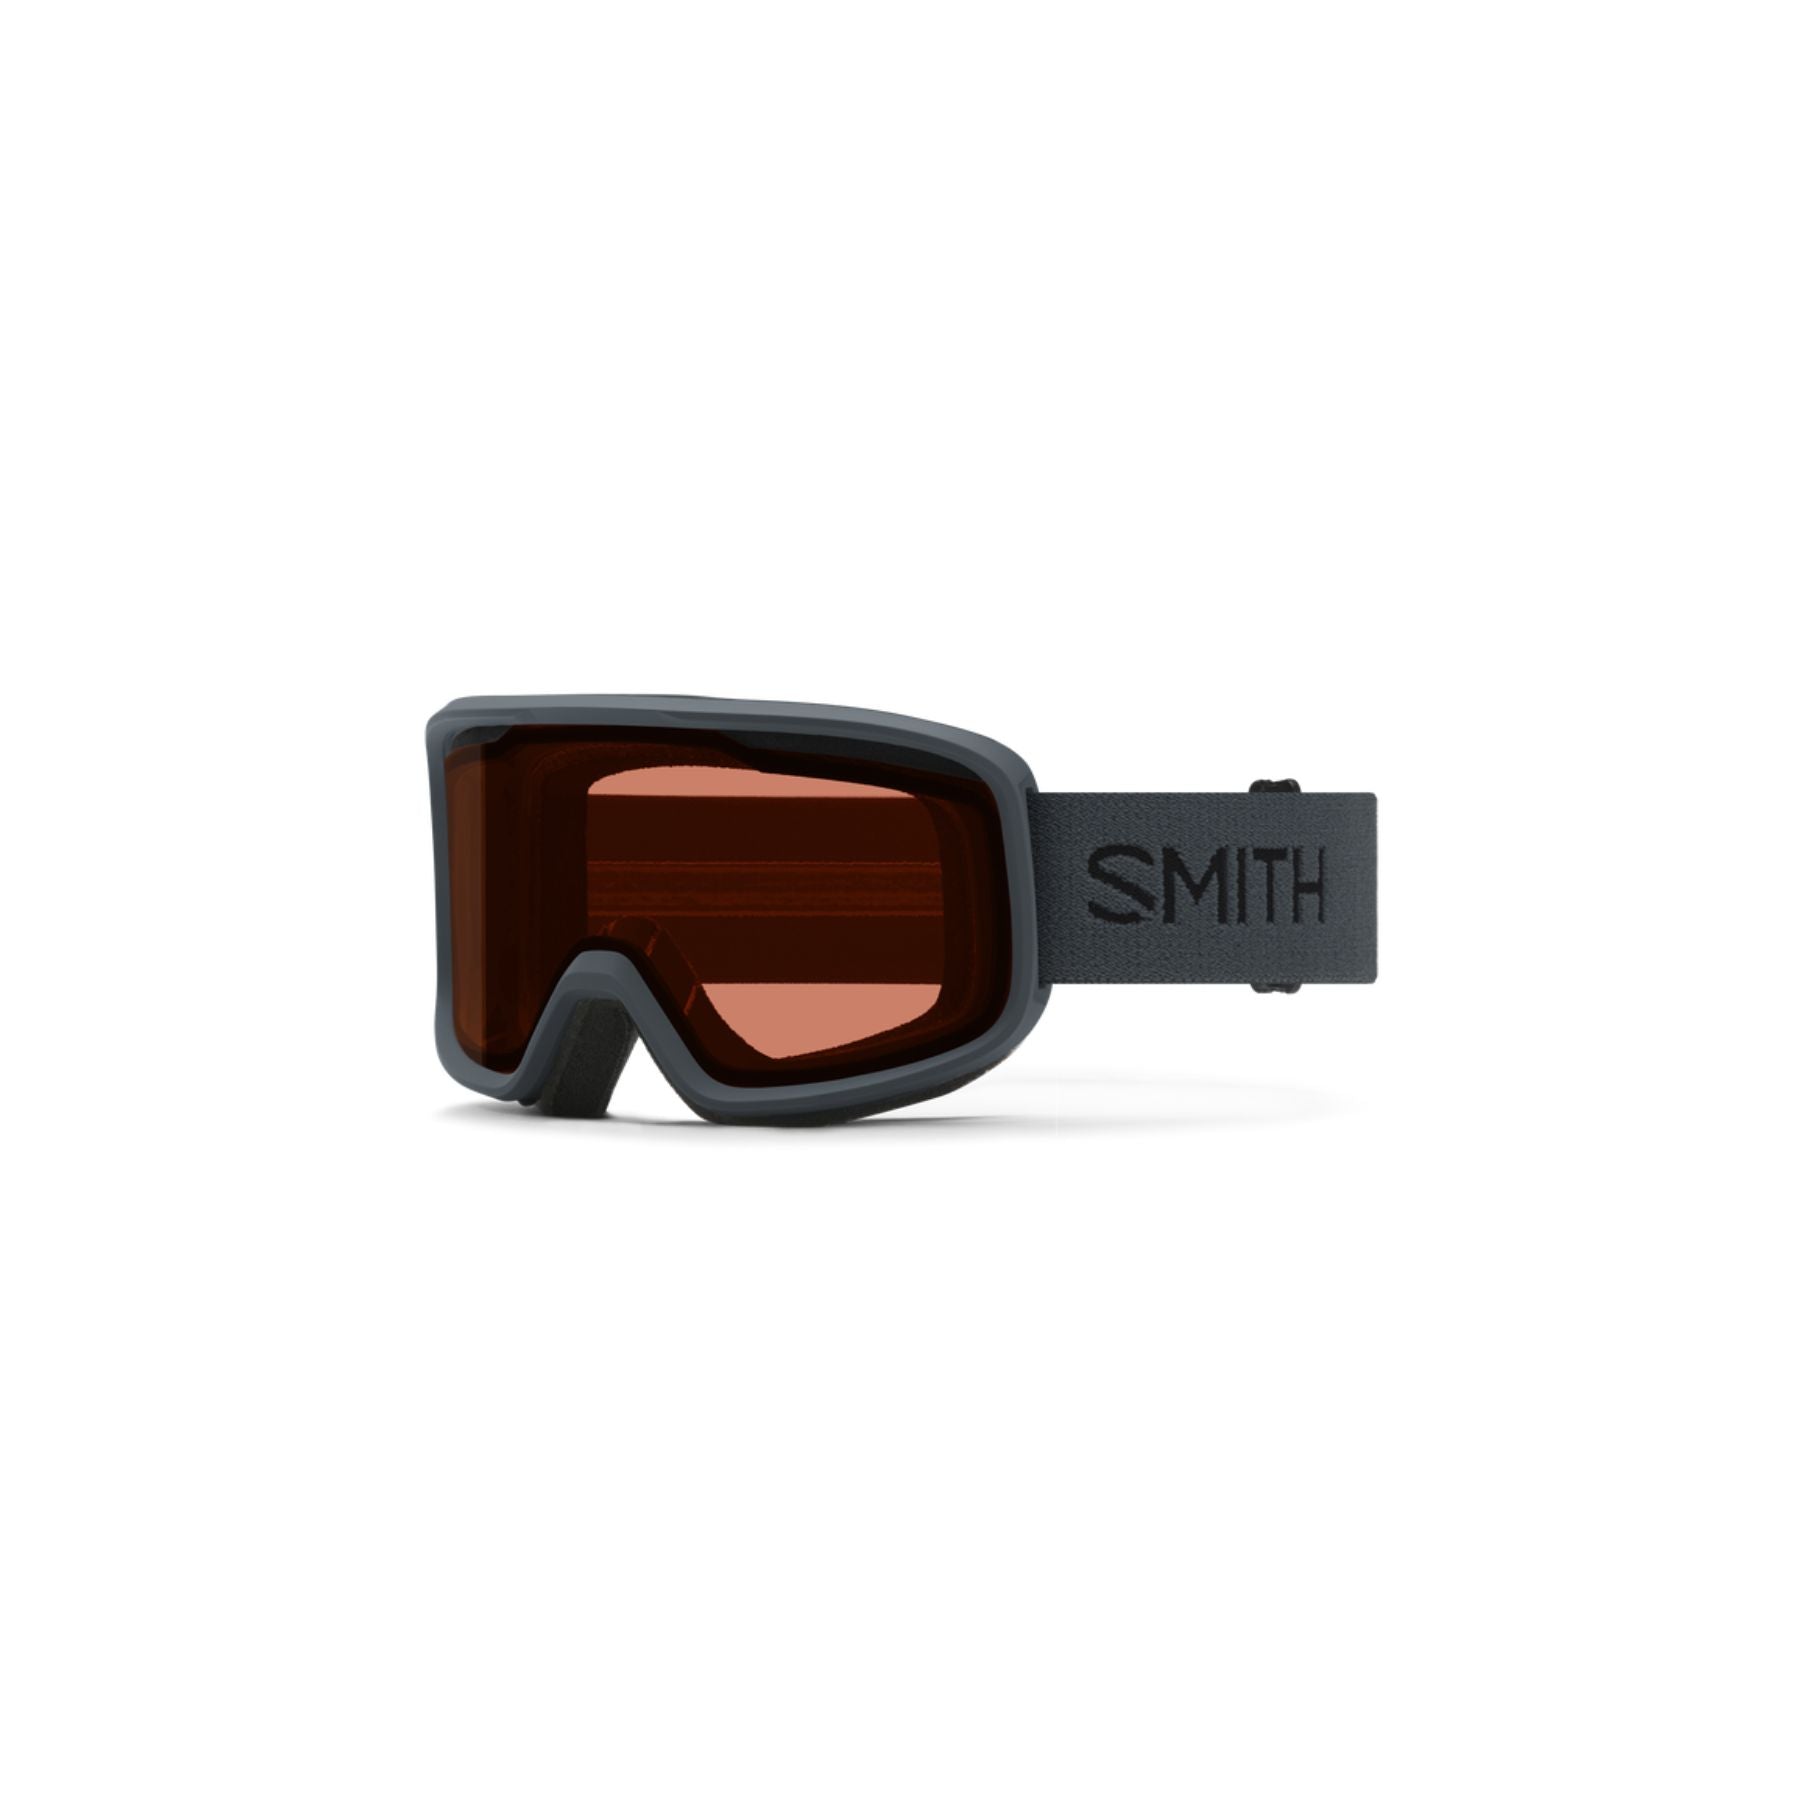 Smith Frontier Goggles in Slate